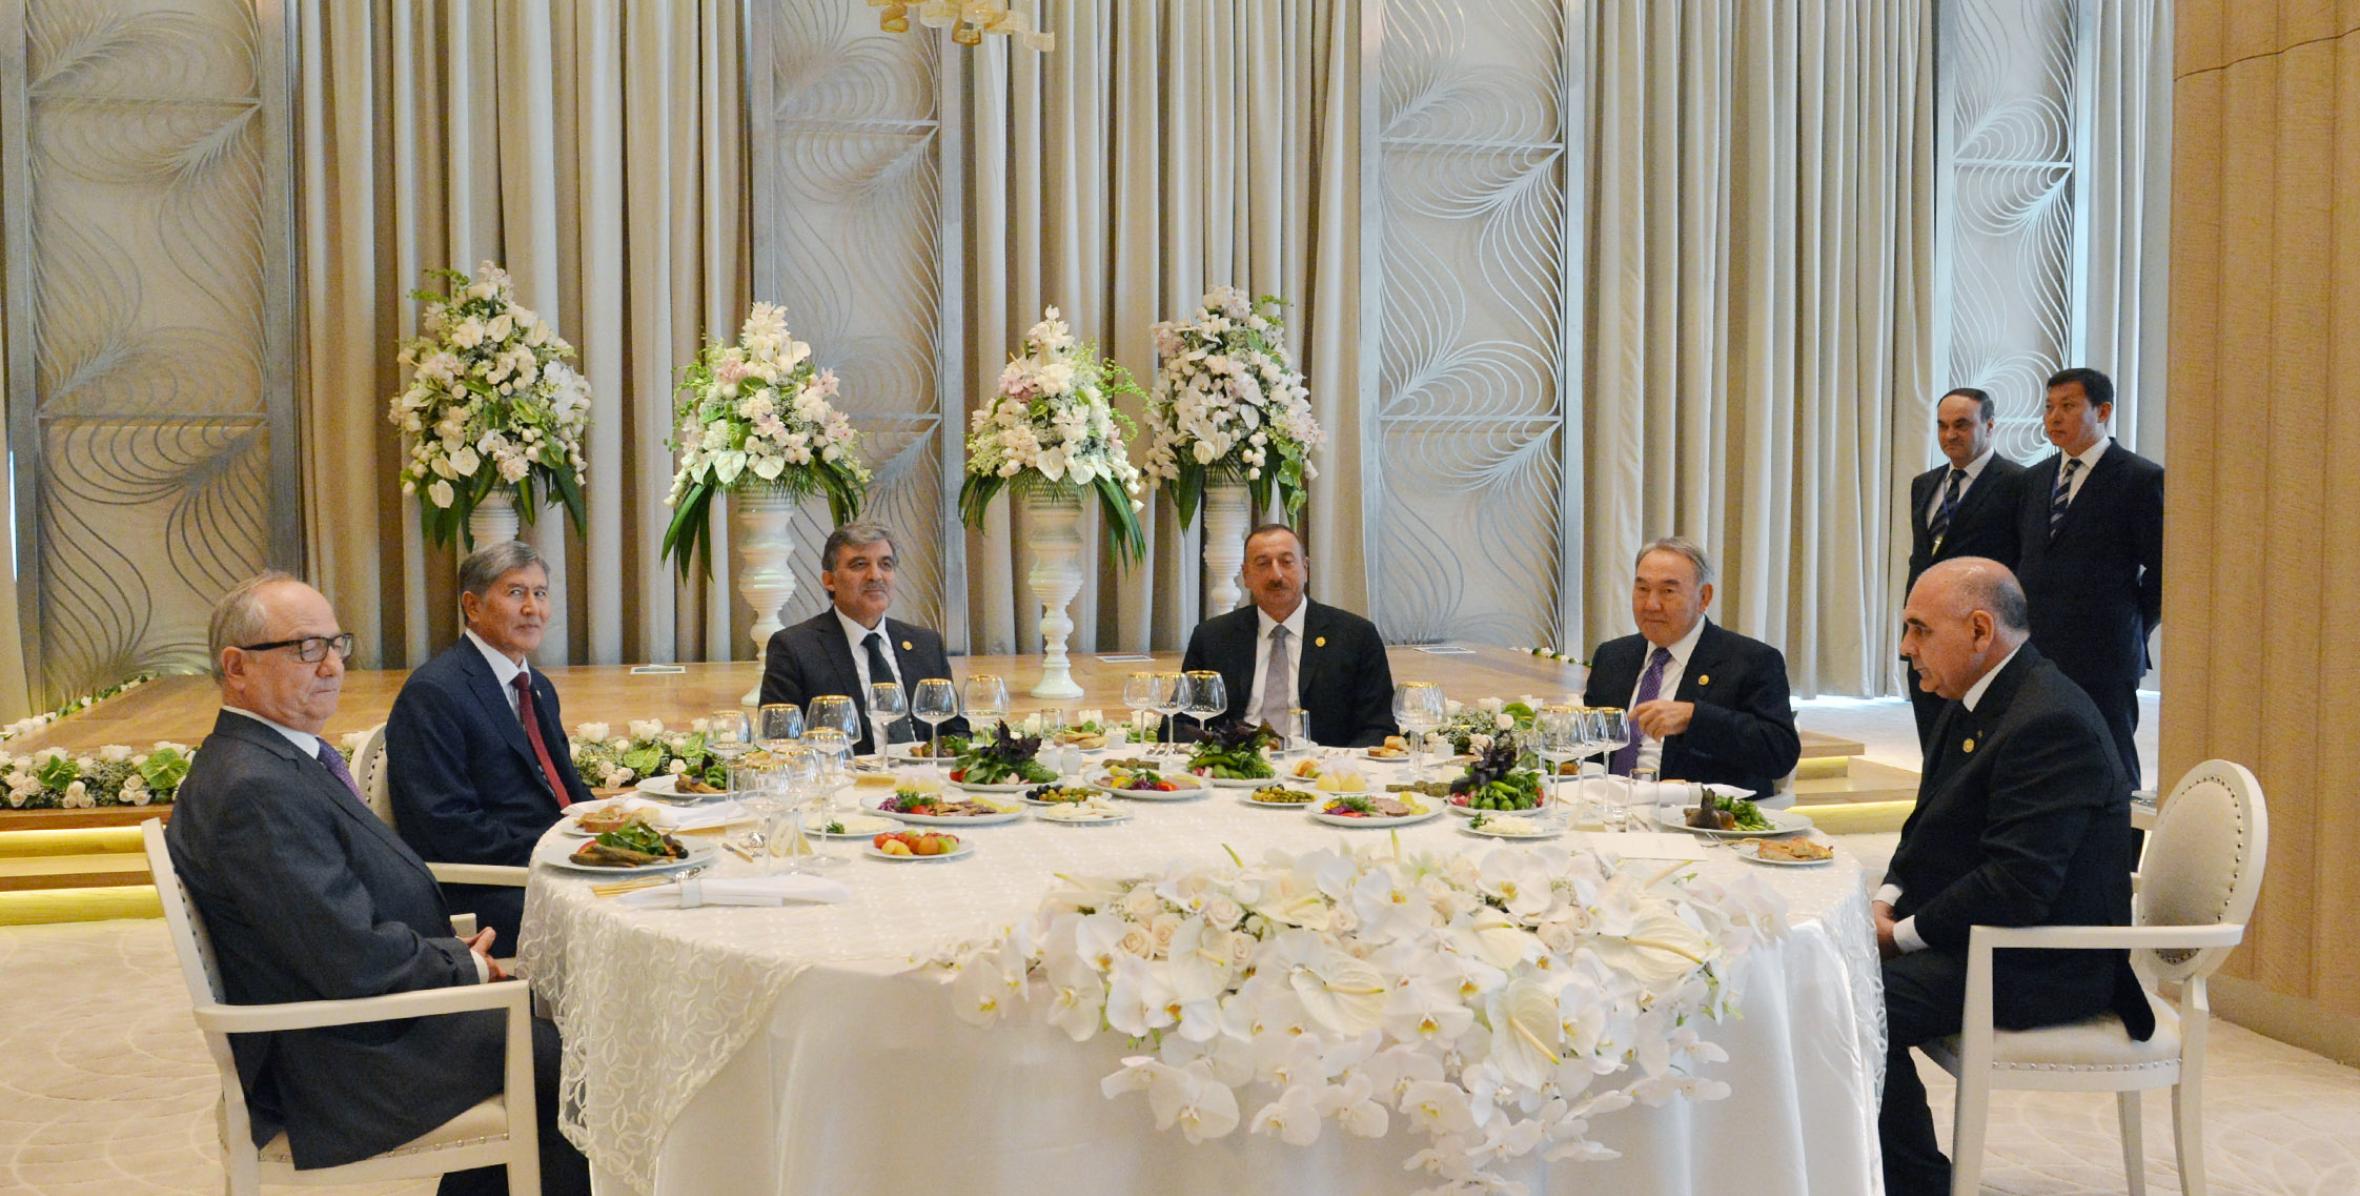 Ilham Aliyev hosted a reception in honor of the heads of state attending the Third Summit of the Cooperation Council of Turkic-speaking States